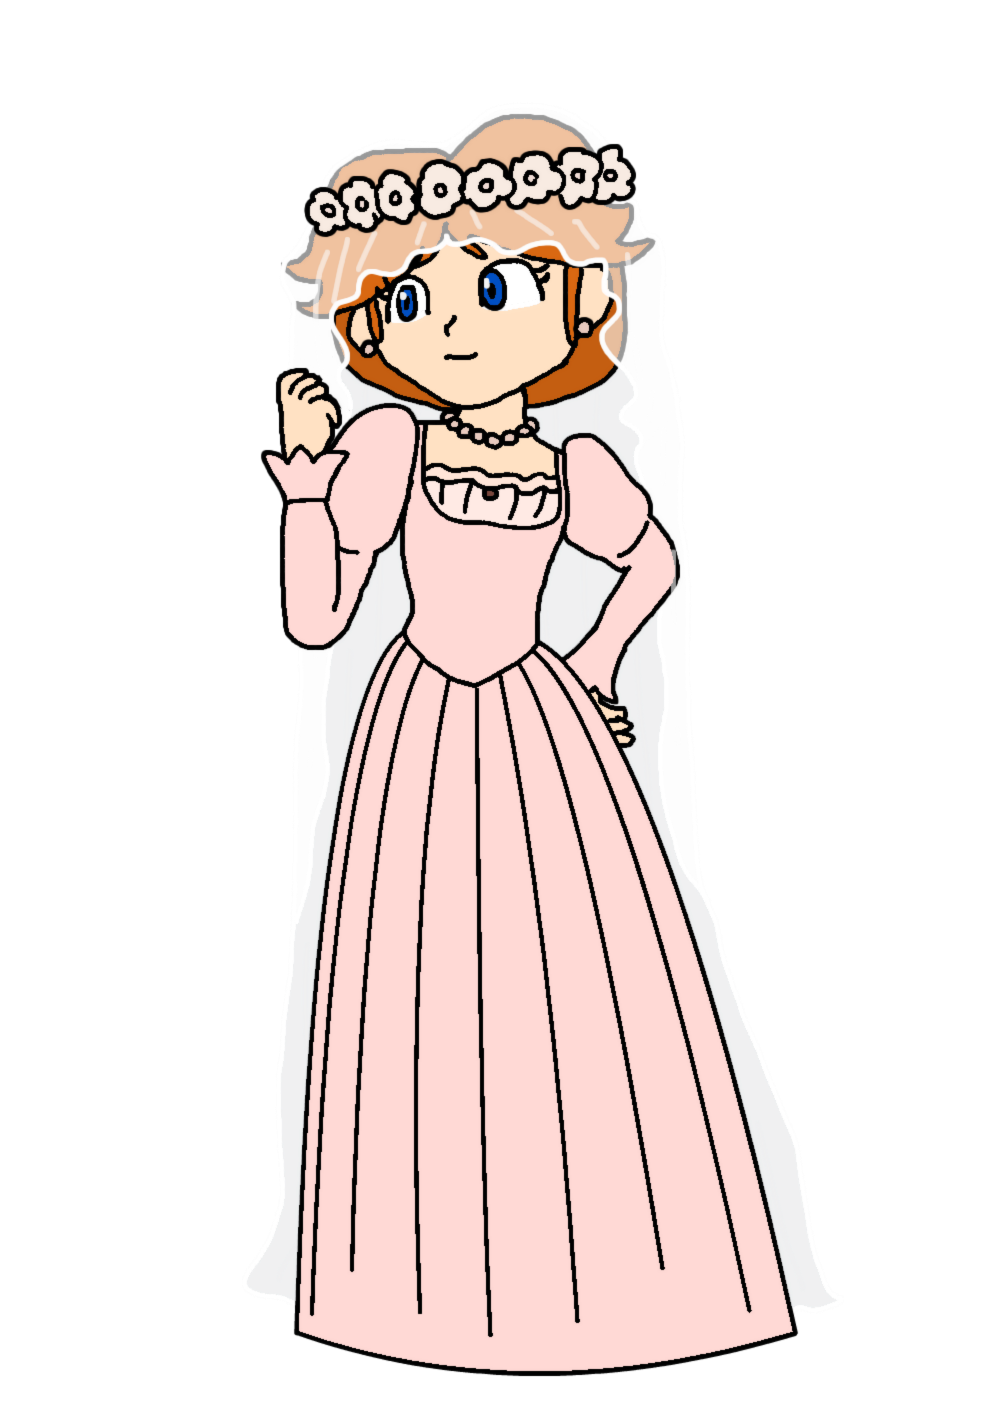 Daisy - Rose Red (Wedding) by KatLime on DeviantArt